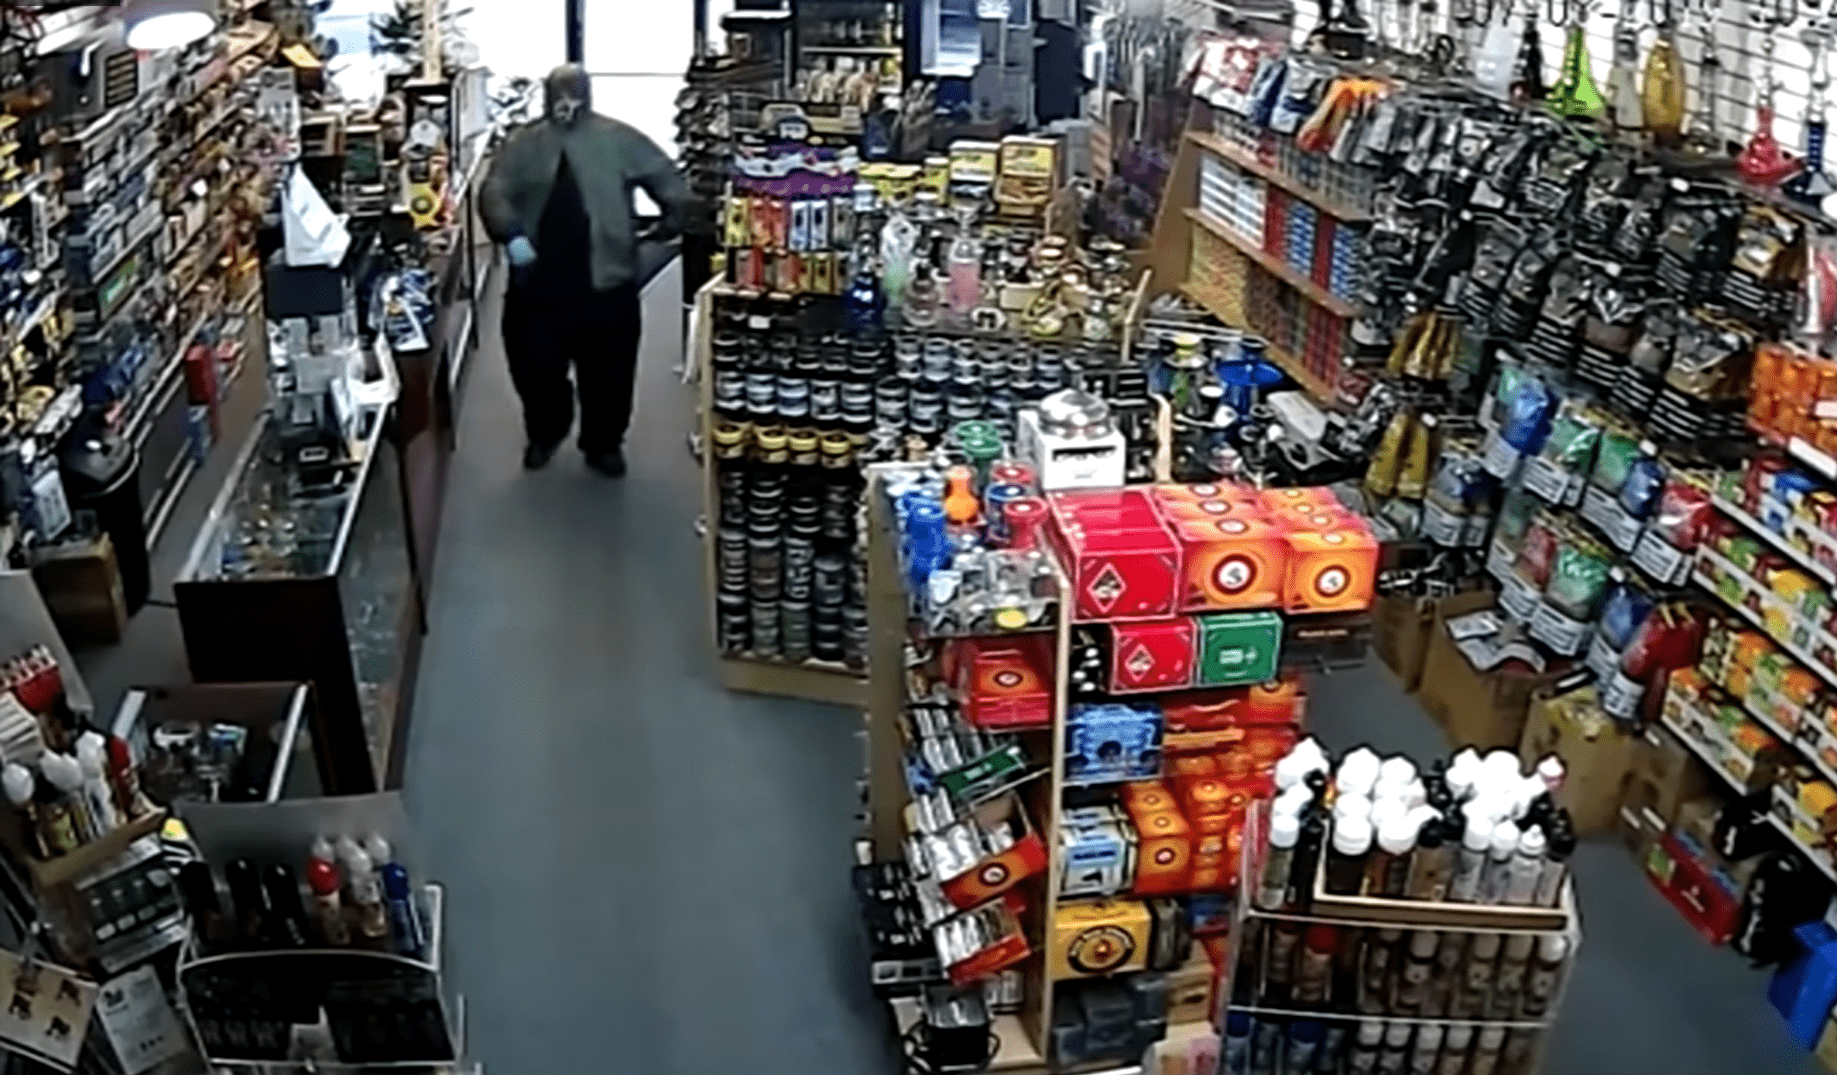 Disguised man with a gun walking into a store.┃Source: youtube.com/CBS 17